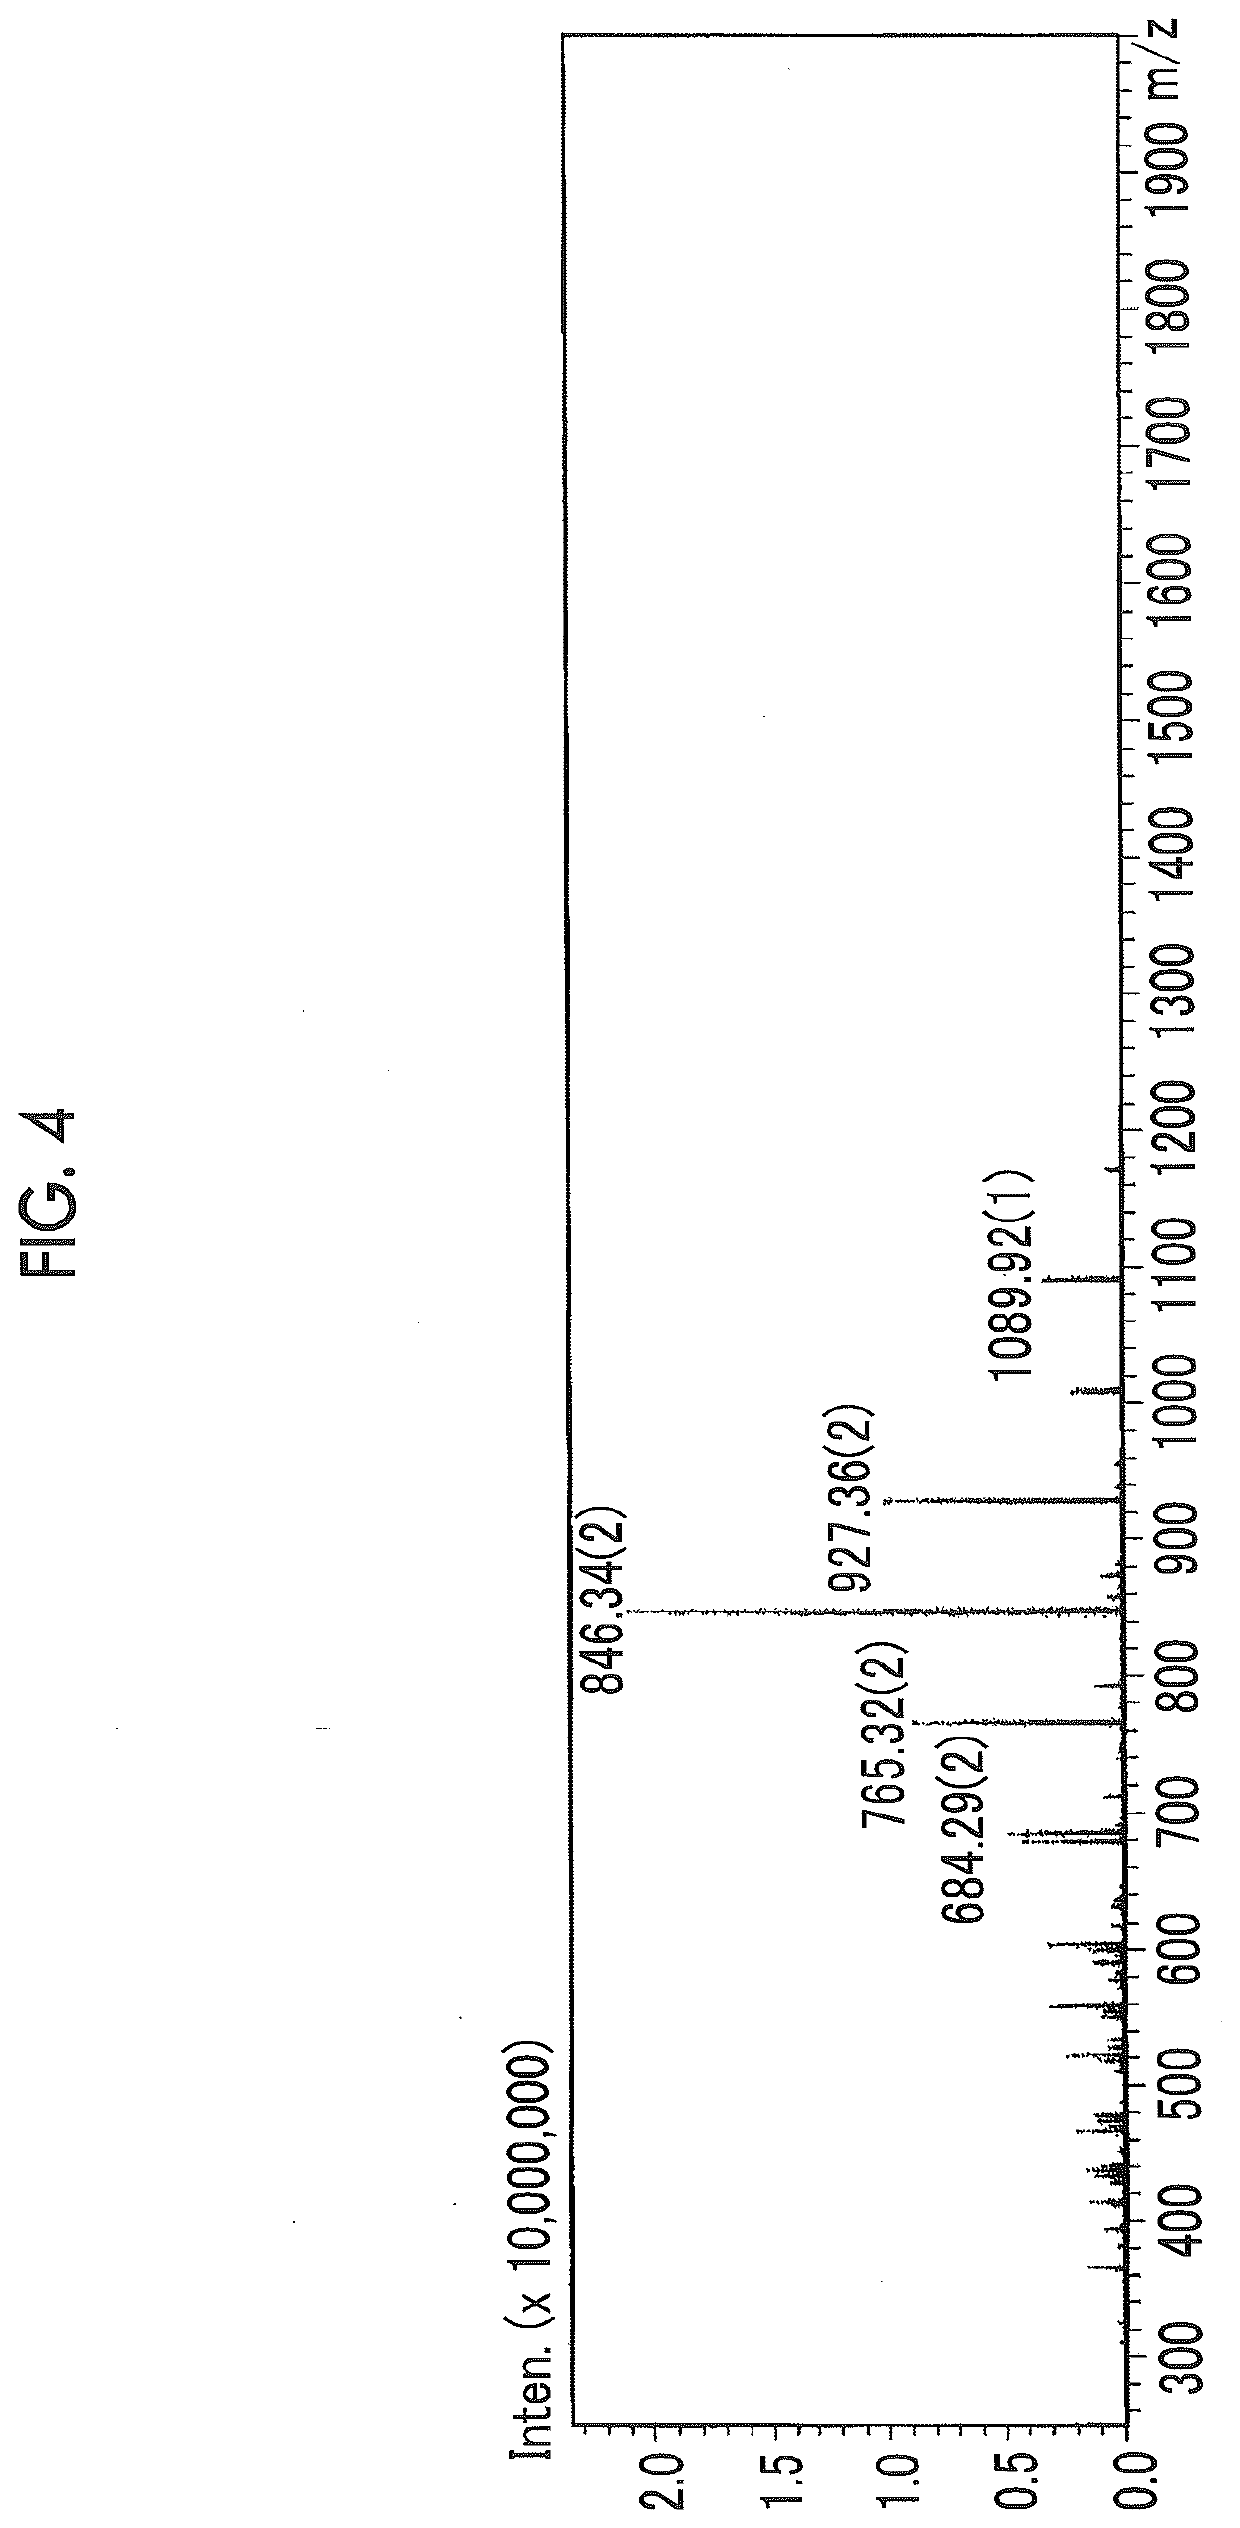 Purification agent for sugar chain or glycopeptide, and use thereof